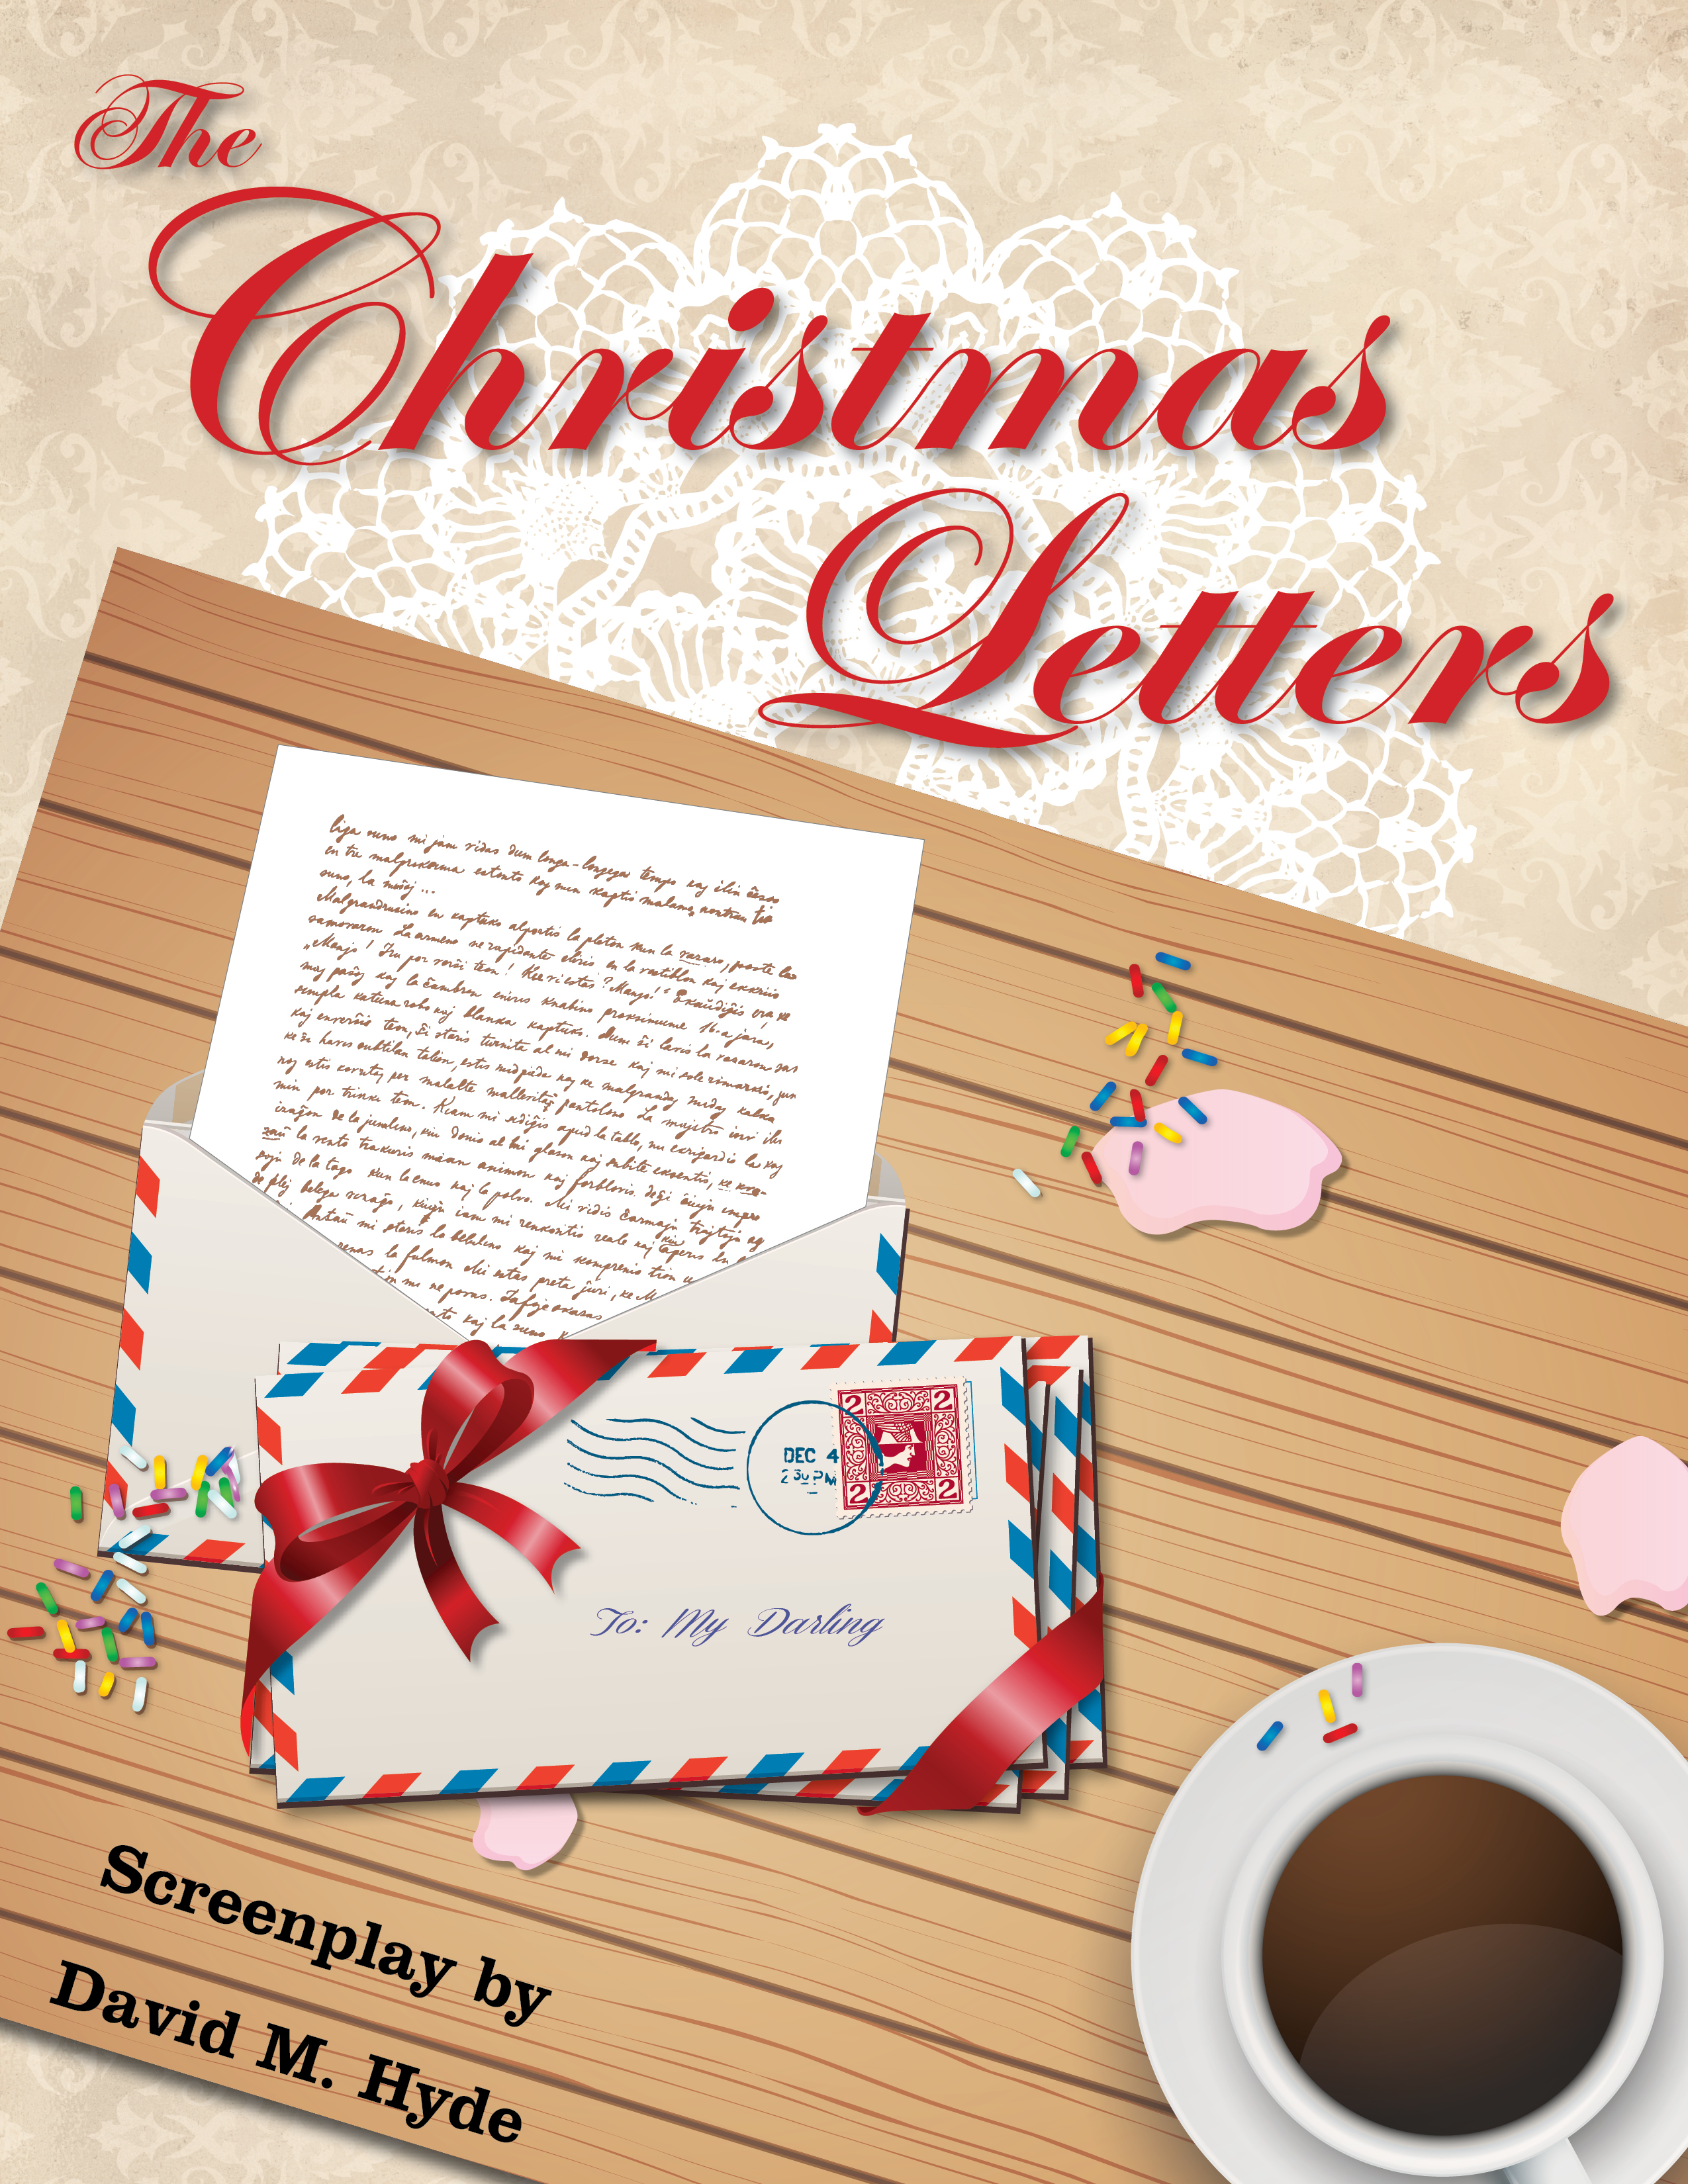 THE CHRISTMAS LETTERS - David M. Hyde - Comedy/Drama/Family/Adventure -TV MOVIE